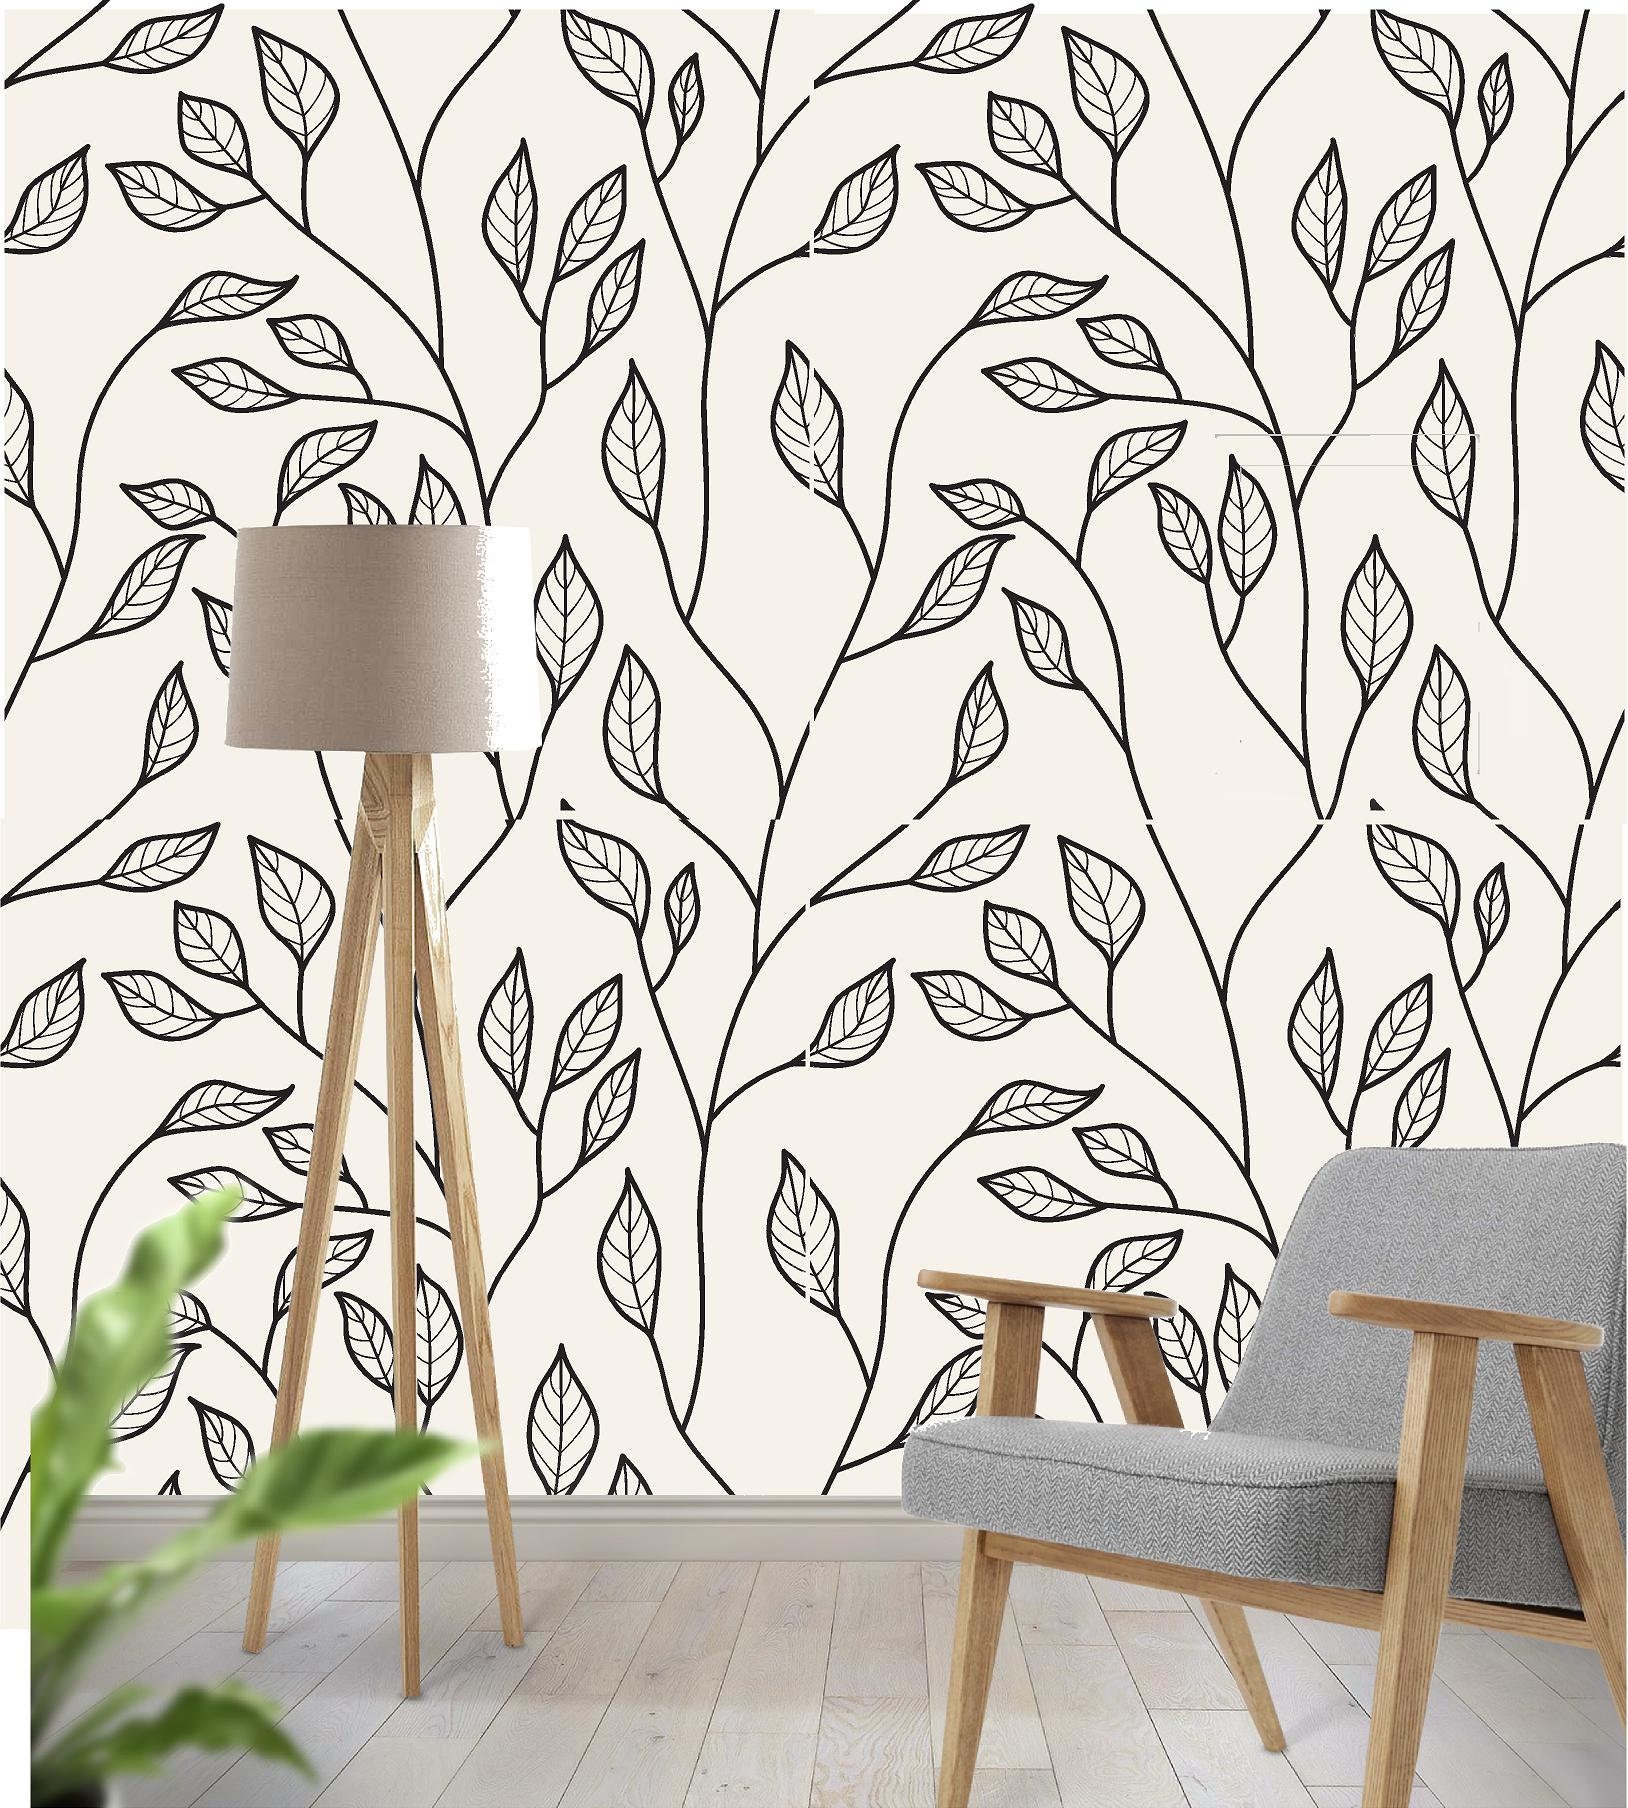 Black and White Leaves Removable Peel and Stick Wallpaper - Etsy UK